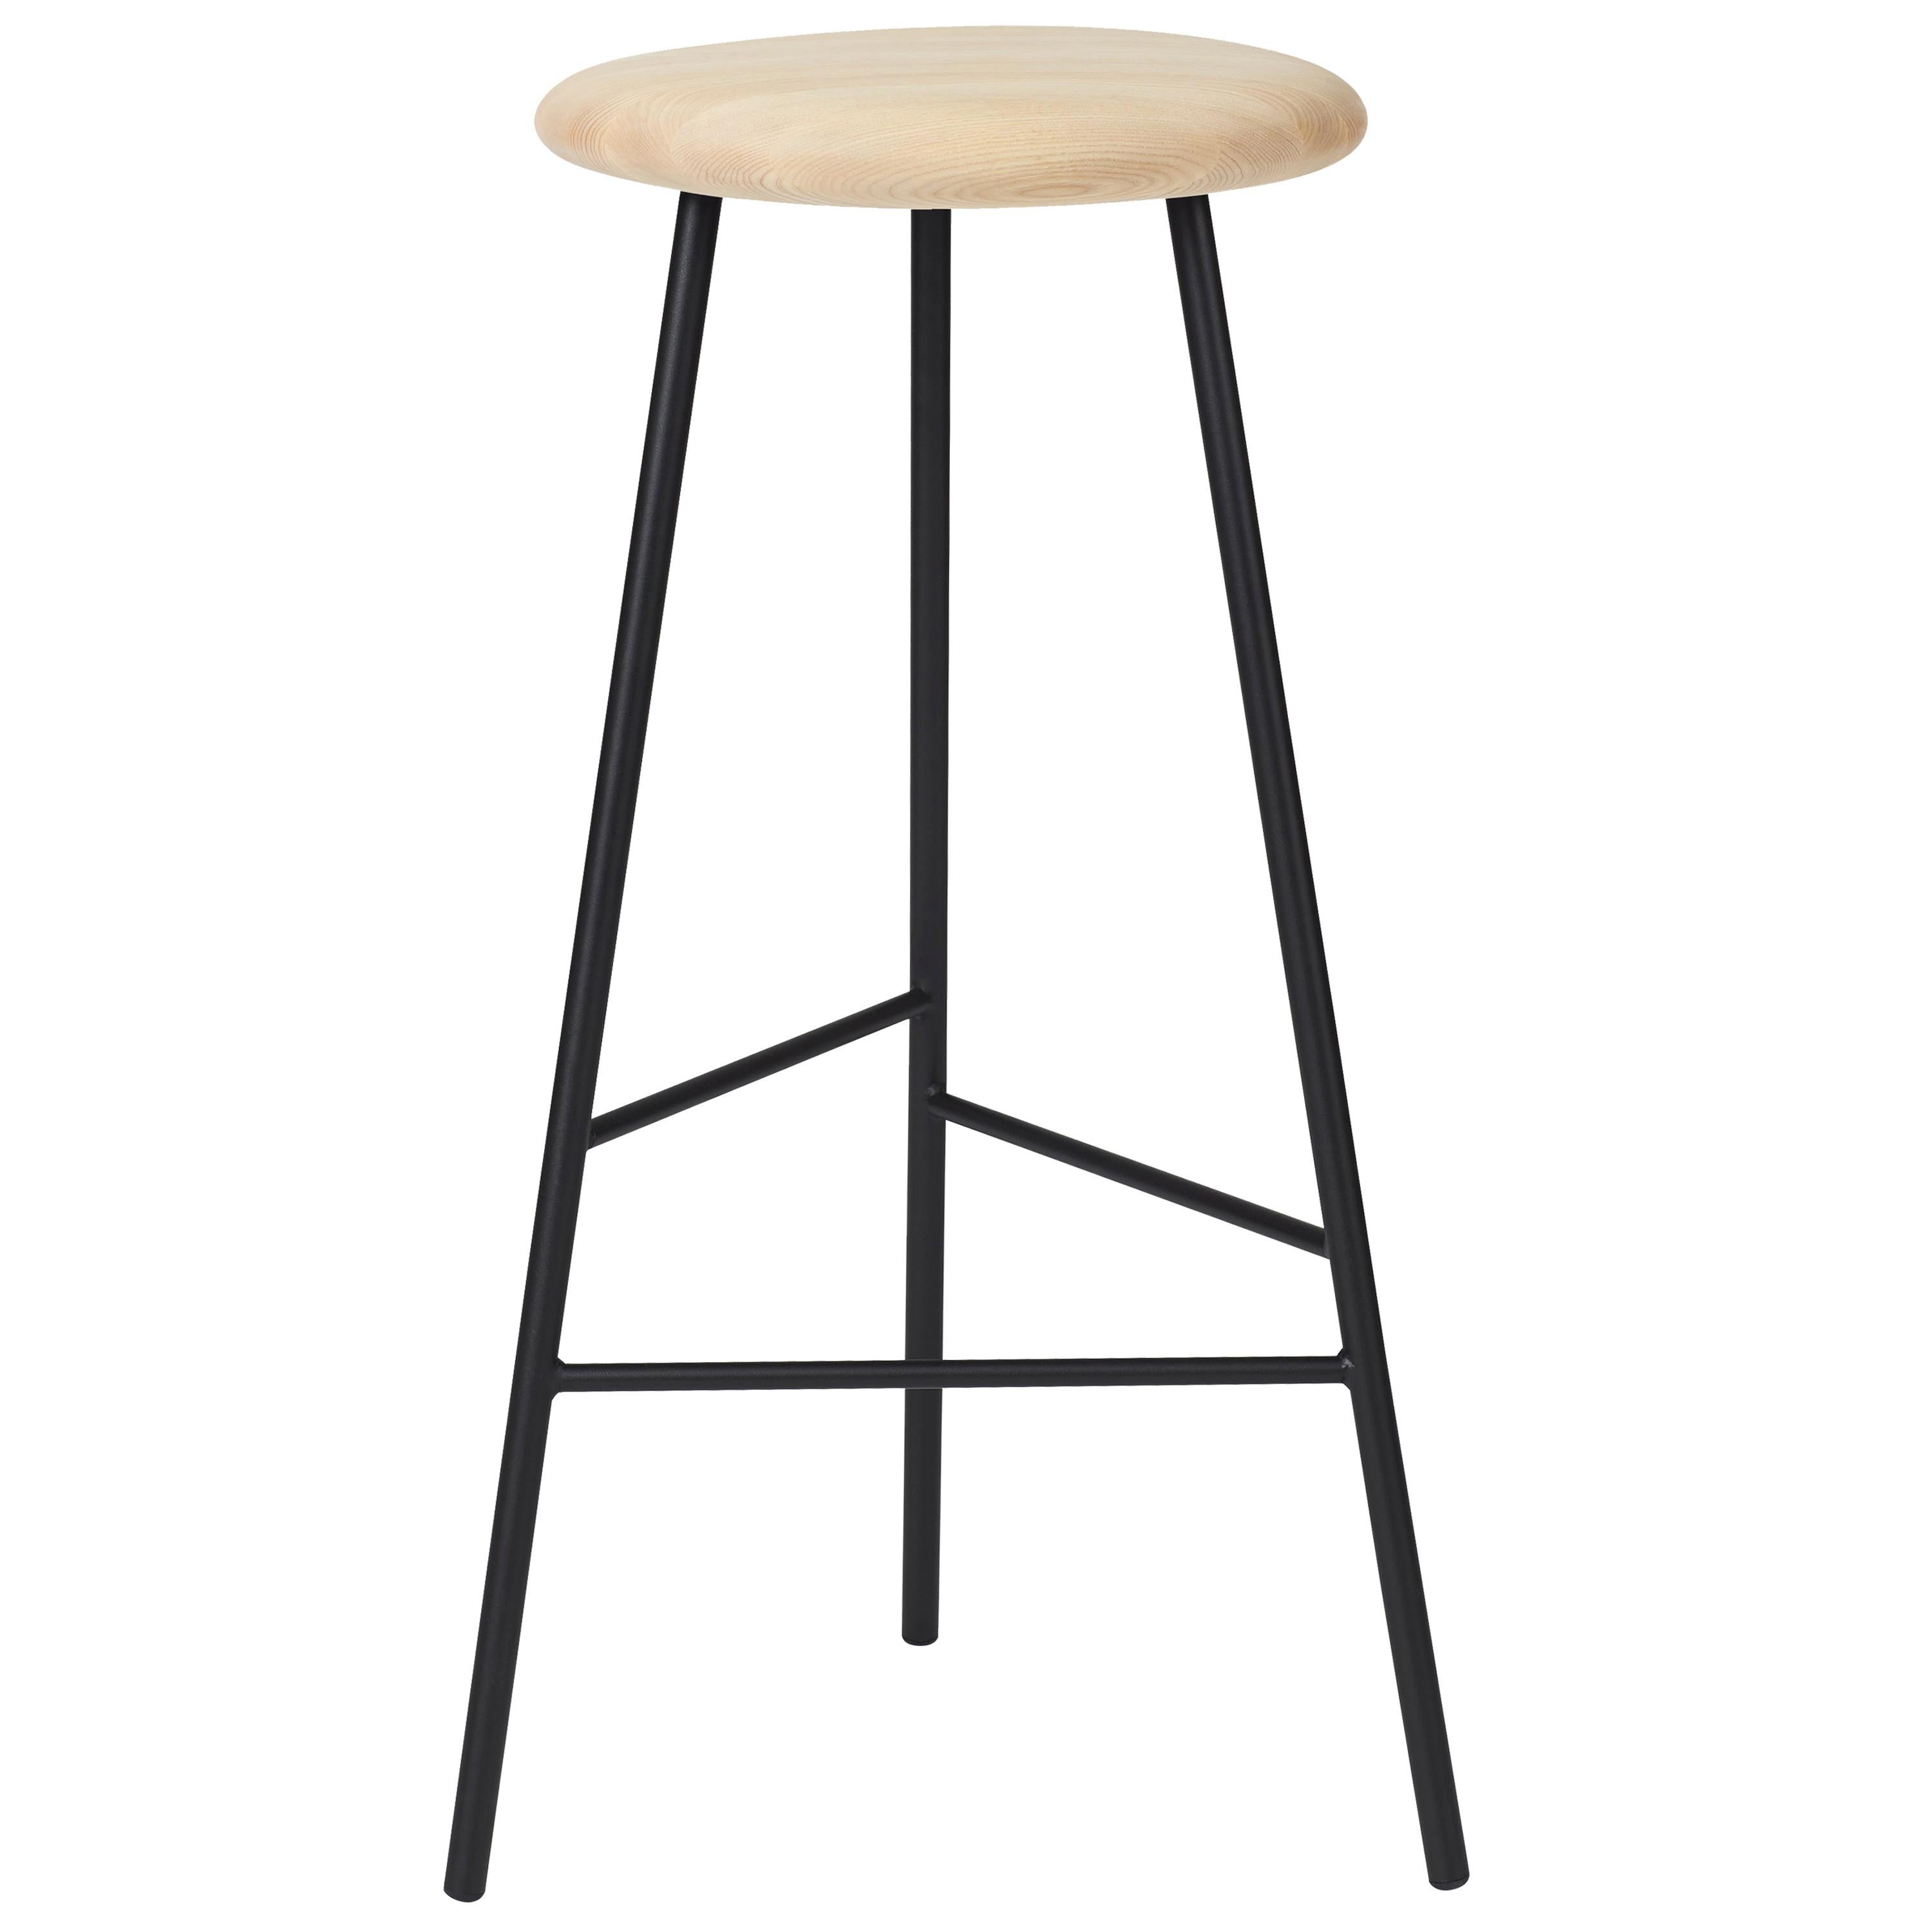 Pebble Bar Stool, by Welling / Ludvik from Warm Nordic